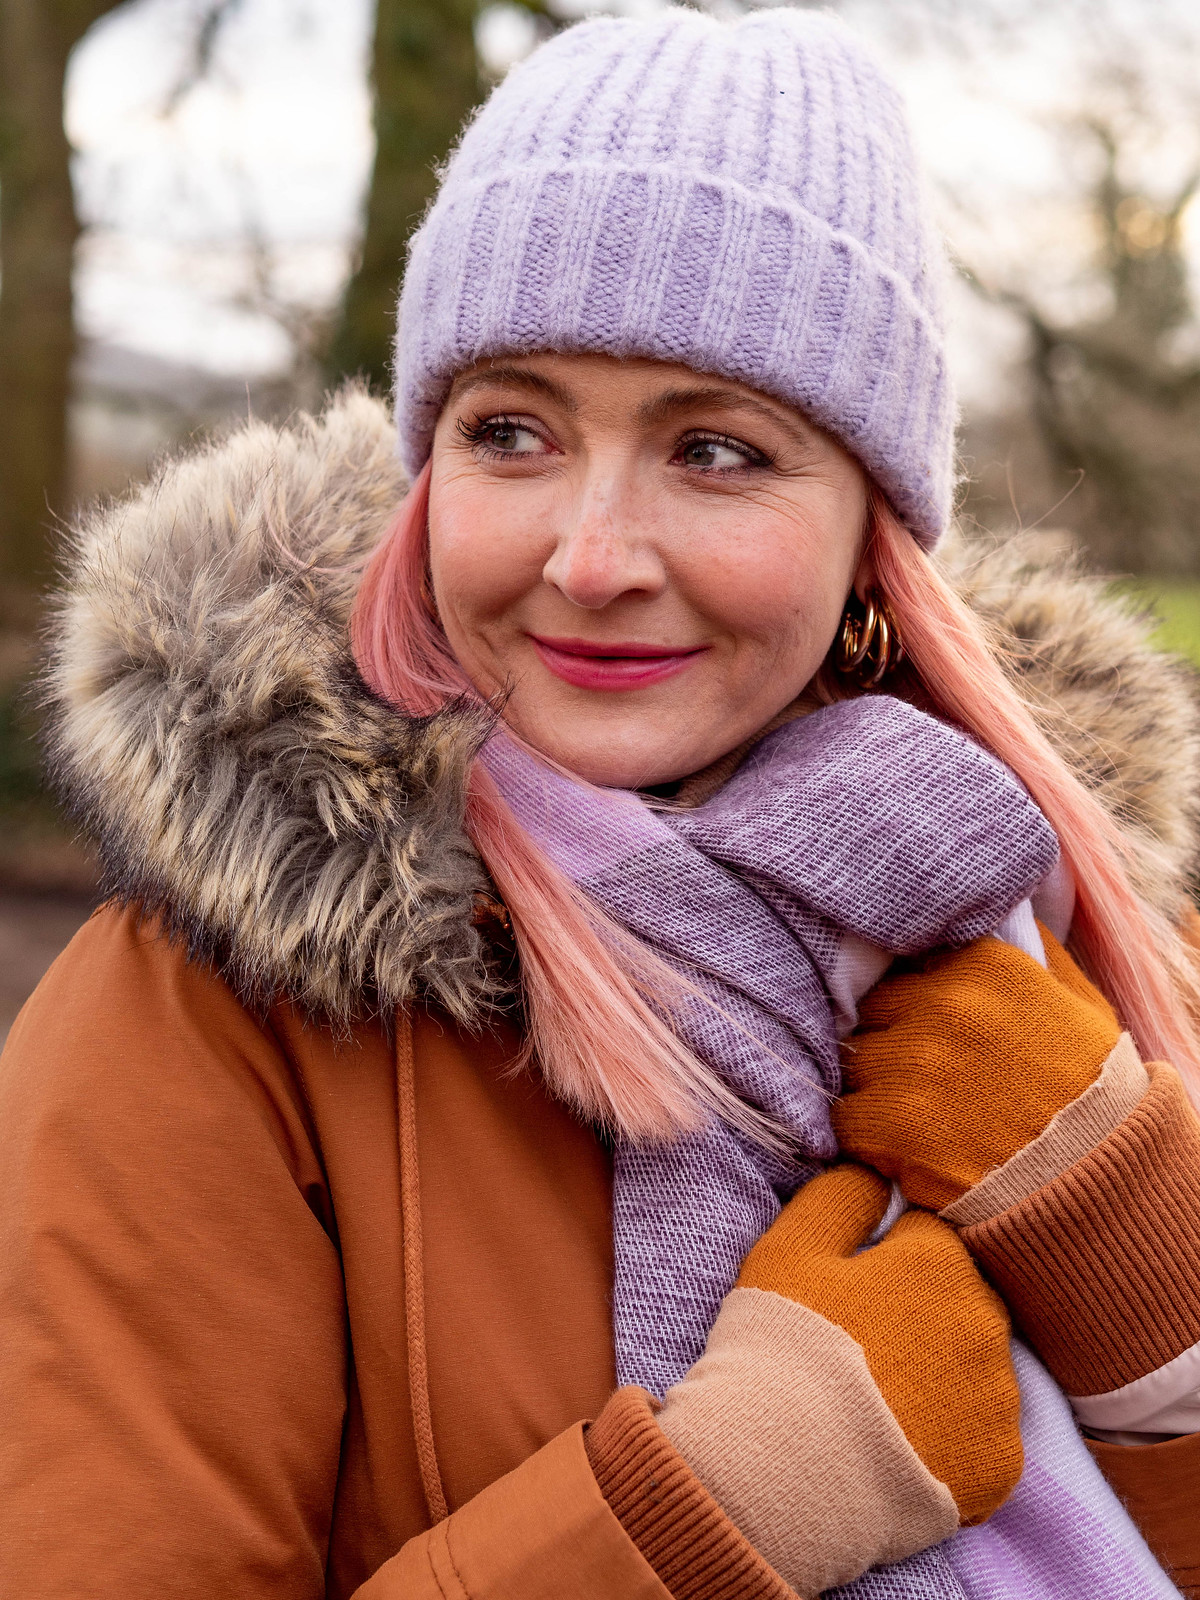 The Importance of Bright Accessories in Cold Weather | Catherine Summers of Not Dressed As Lamb, Over 40 Fashion, wearing burnt orange parka, lilac beanie and scarf and blue jeans tucked into red striped wellies